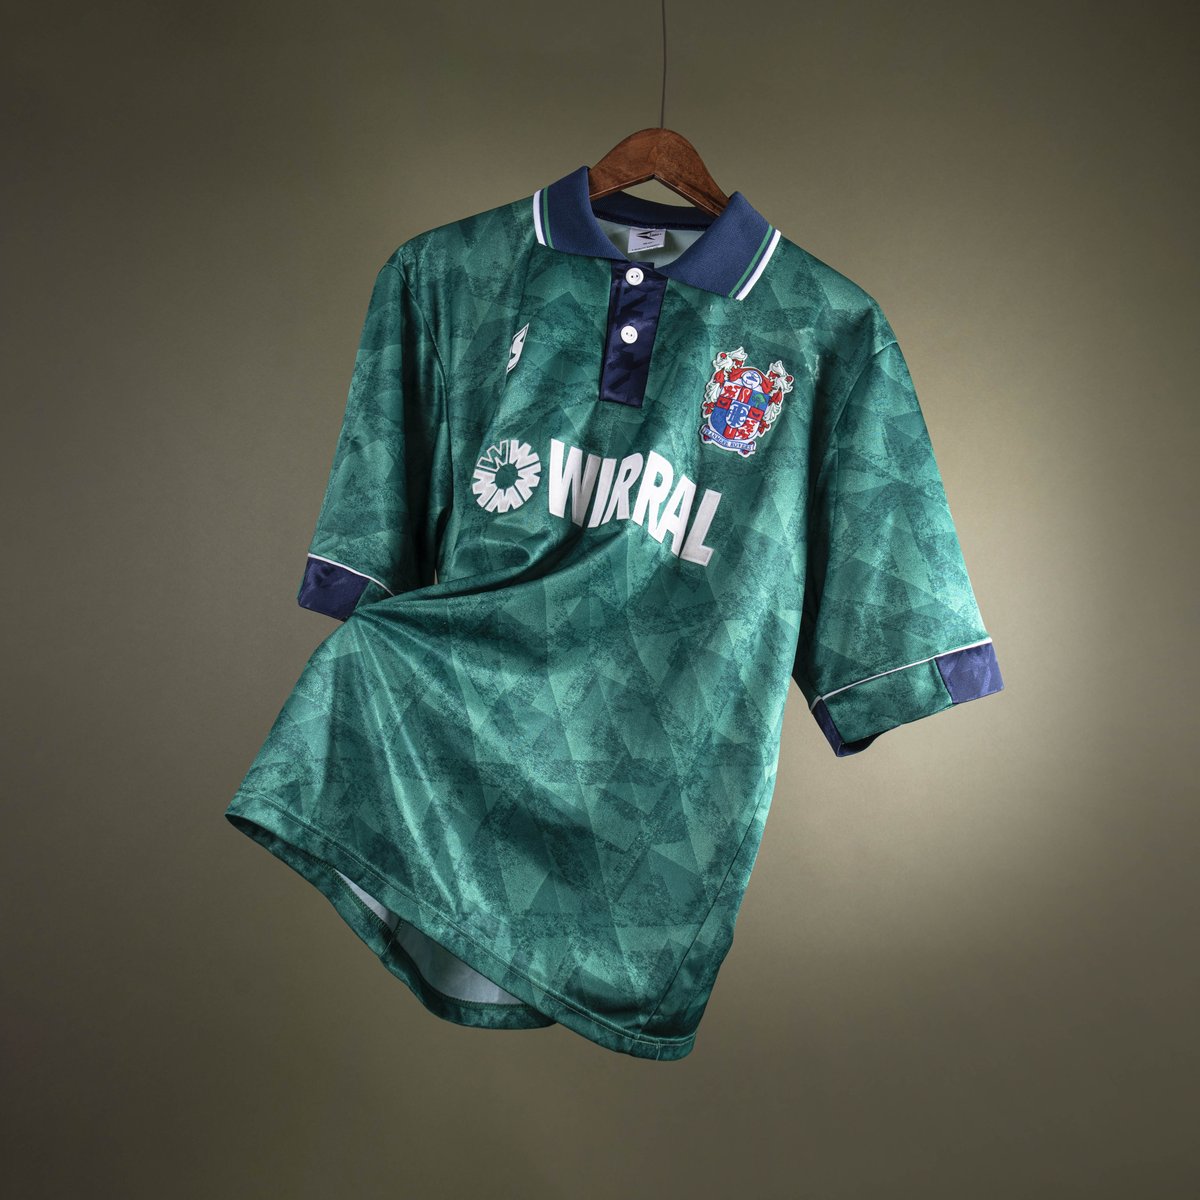 Tranmere Rovers 1993 Away by Rover Sports 🌟

Hitting the site today at 14:00 (UK Time) in a size Large.